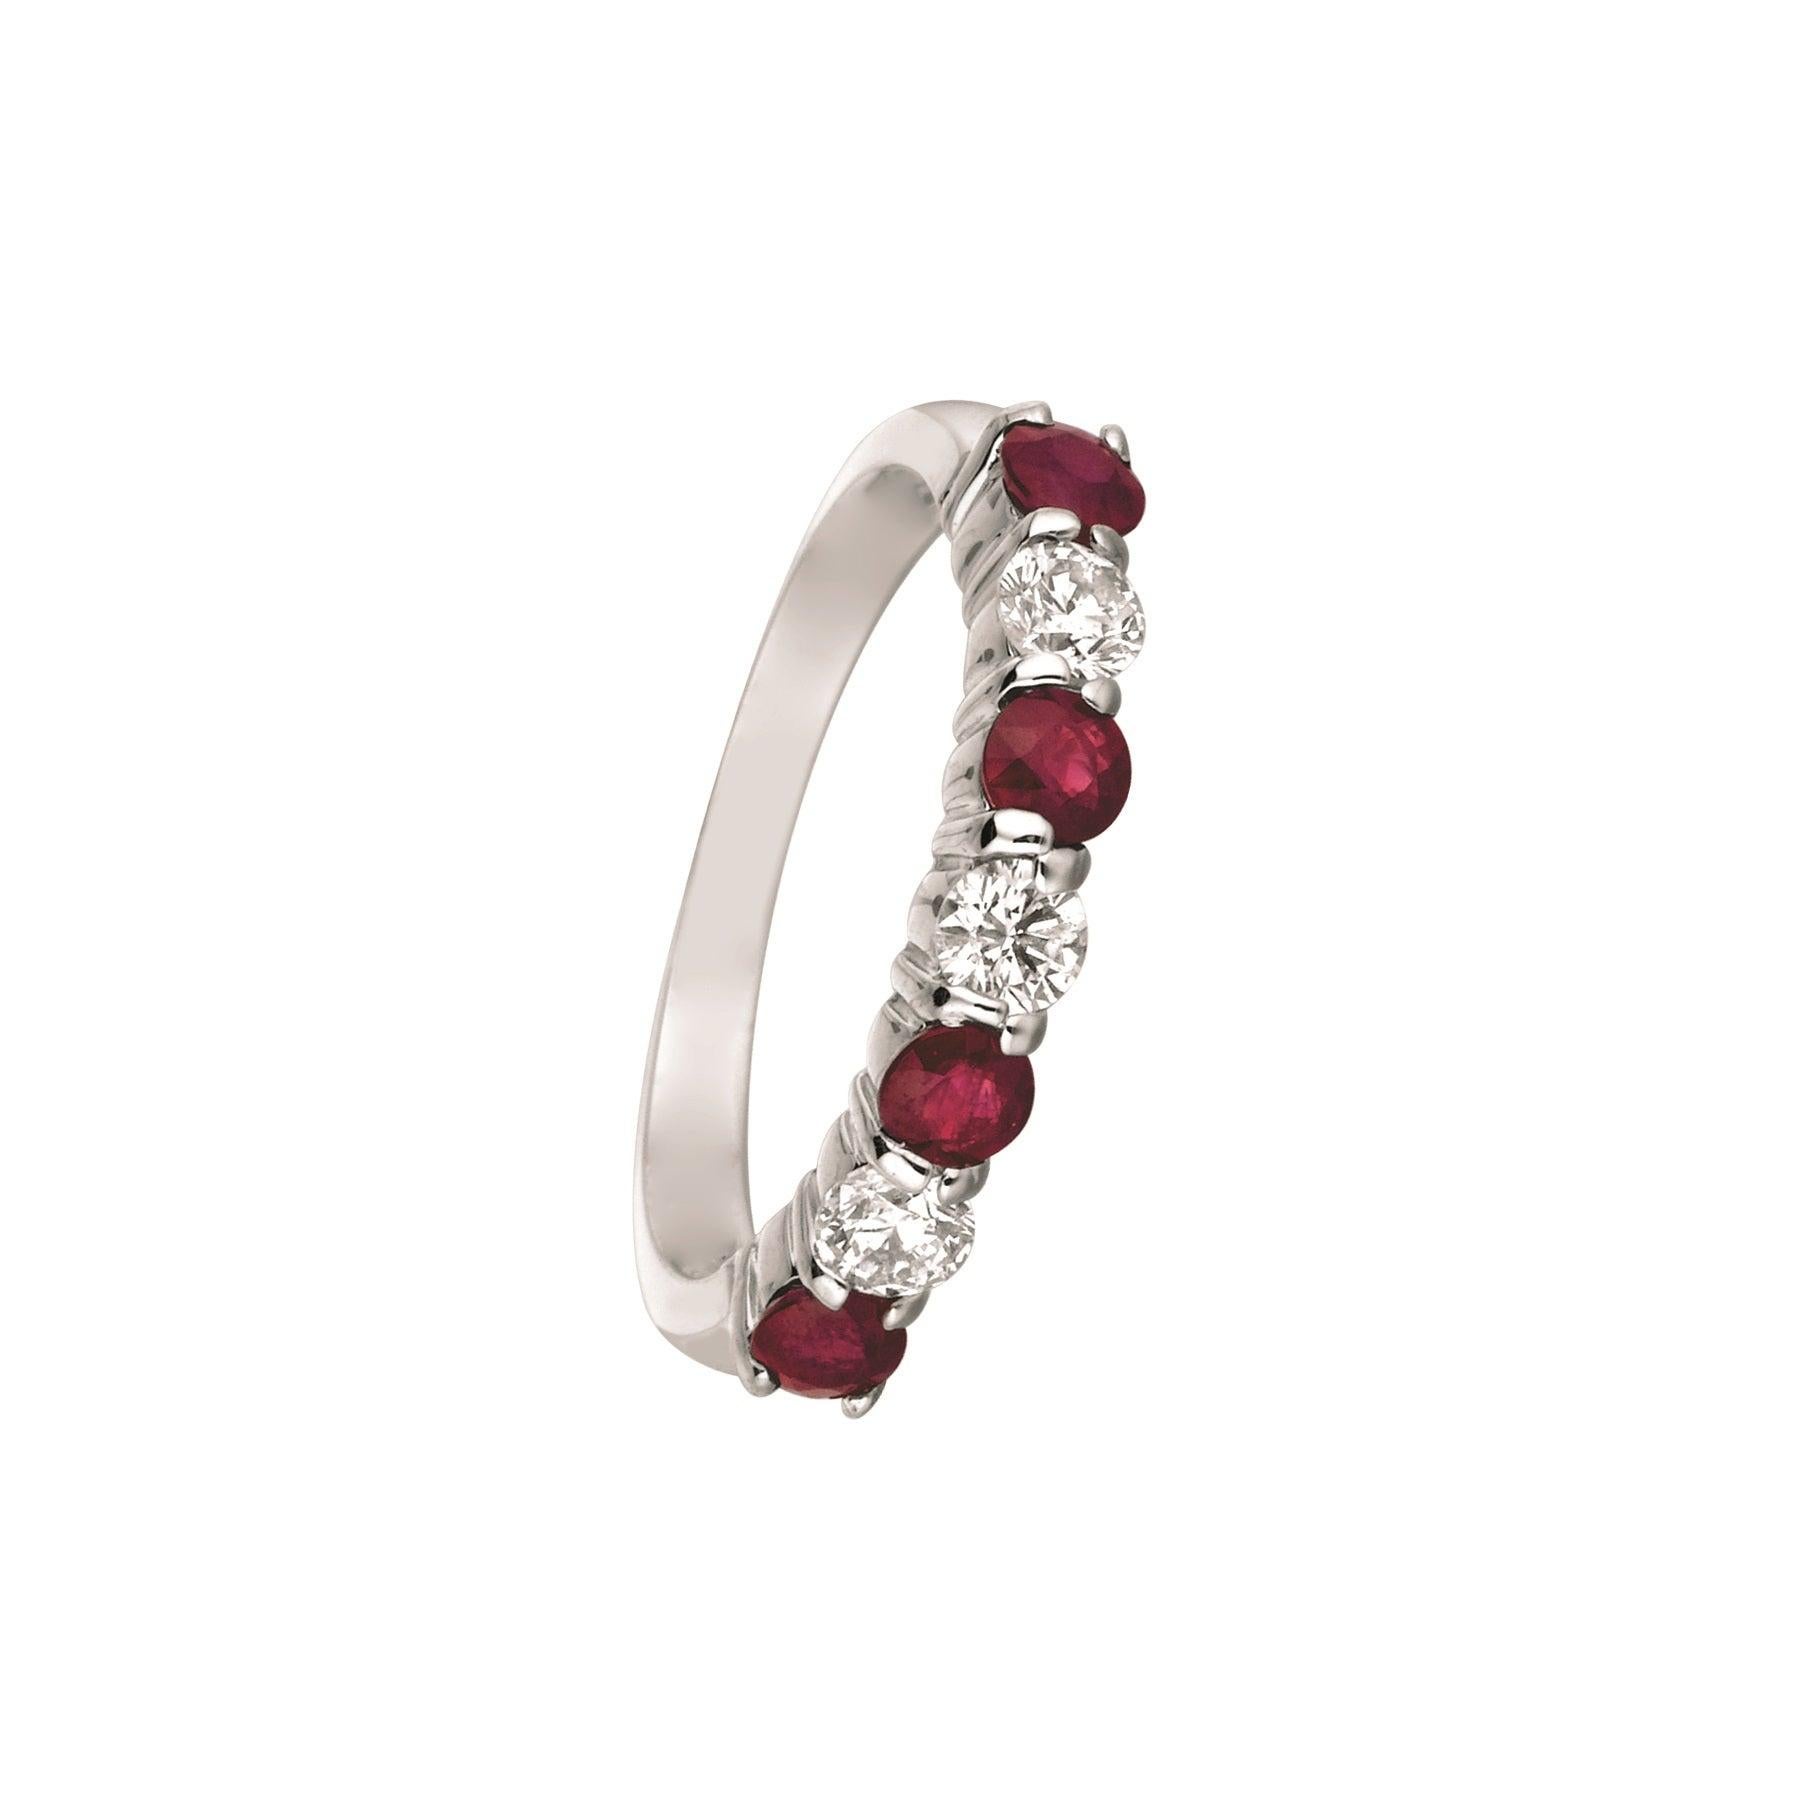 For Sale:  1.65 Carat Natural Diamond and Ruby 7-Stone Ring Band 14 Karat White Gold 3